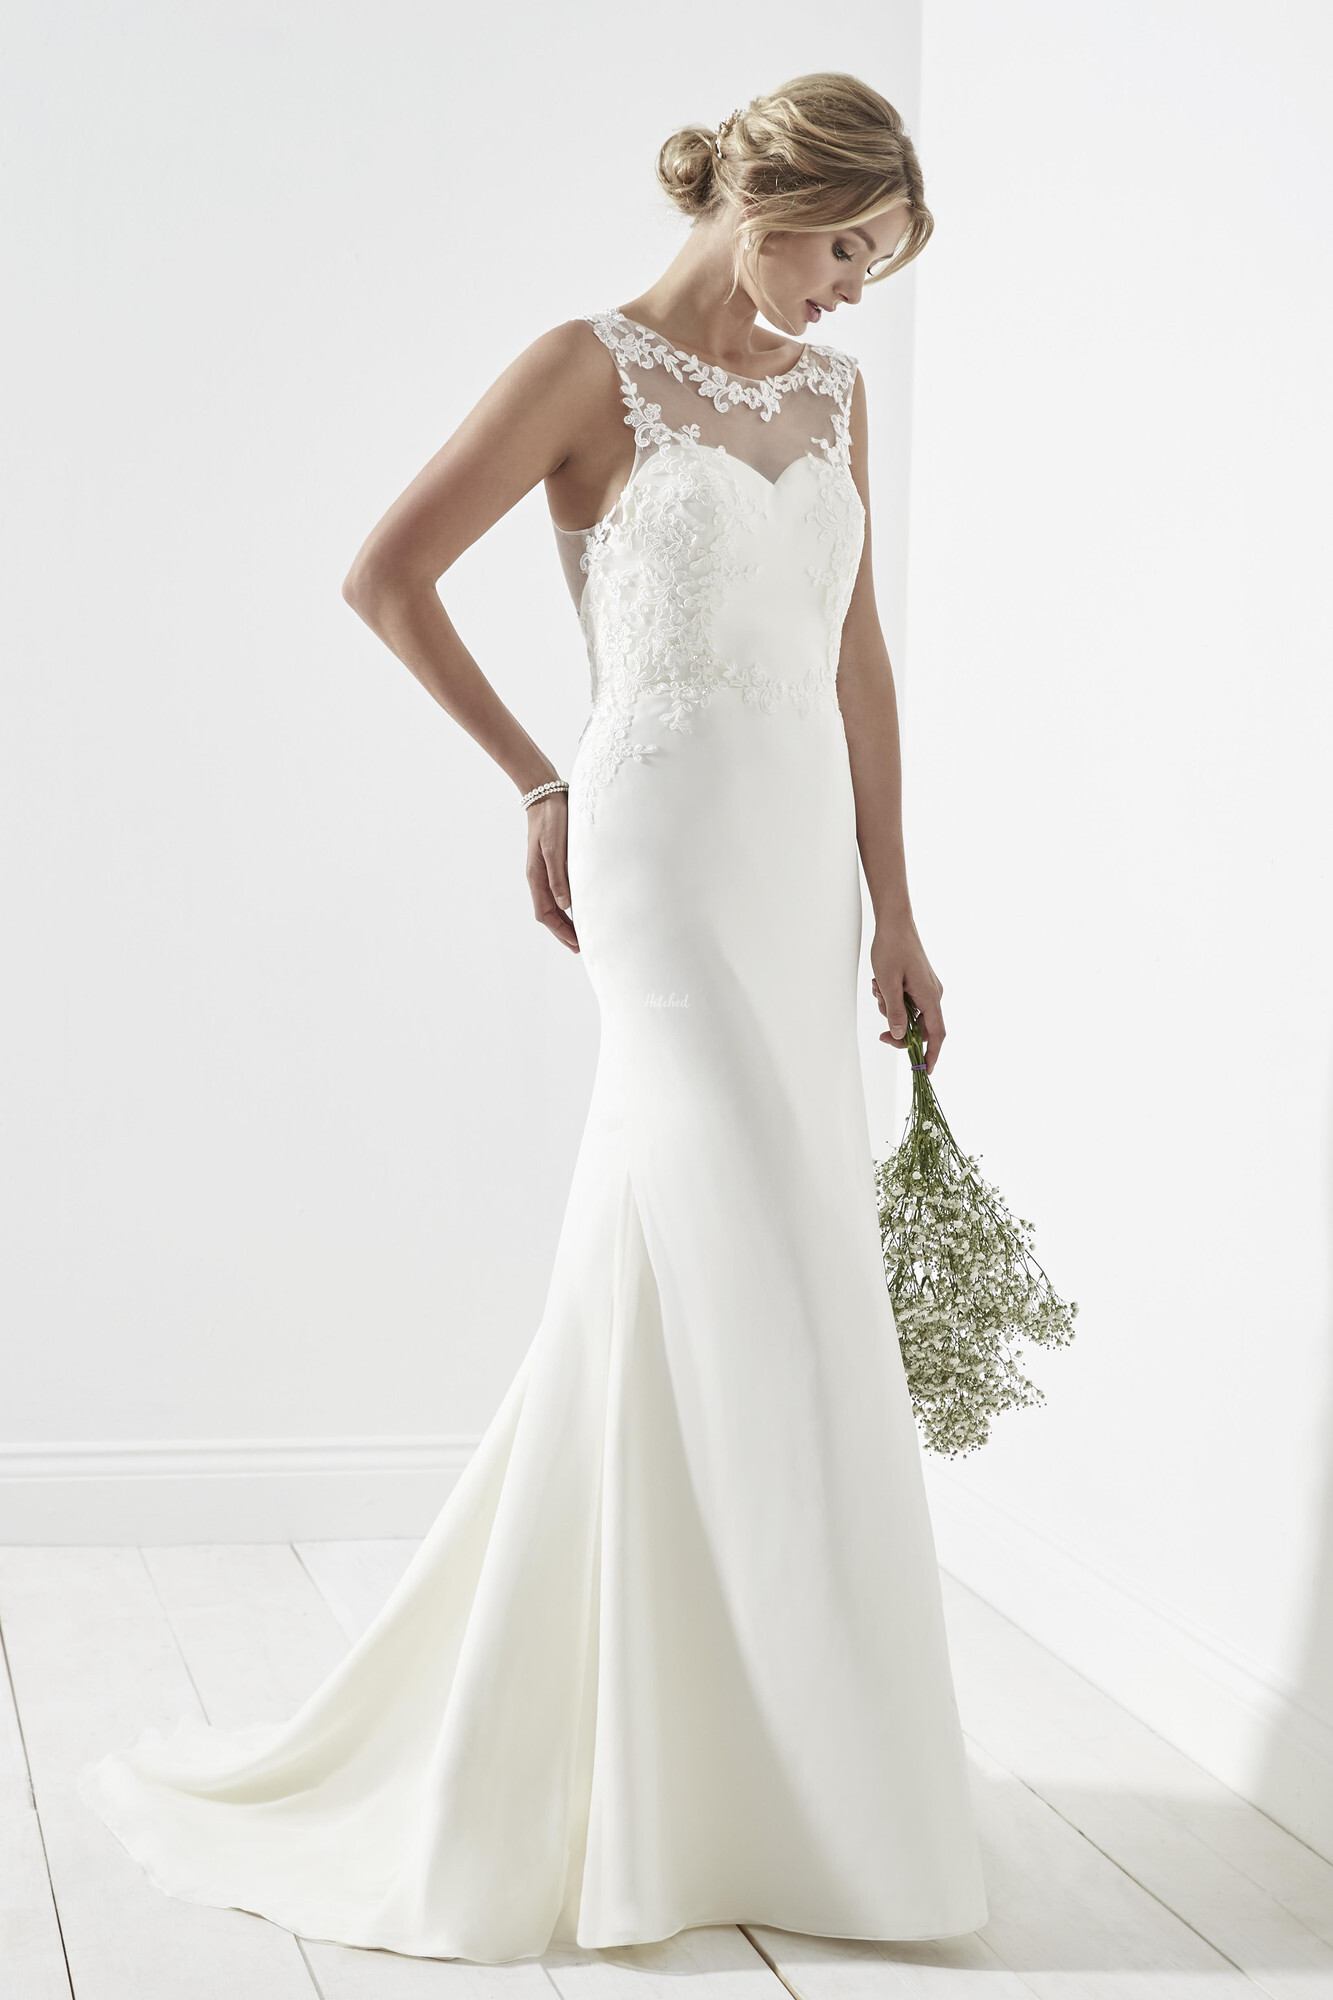 Aspen Wedding Dress from Lily Rose Bridal - hitched.co.uk